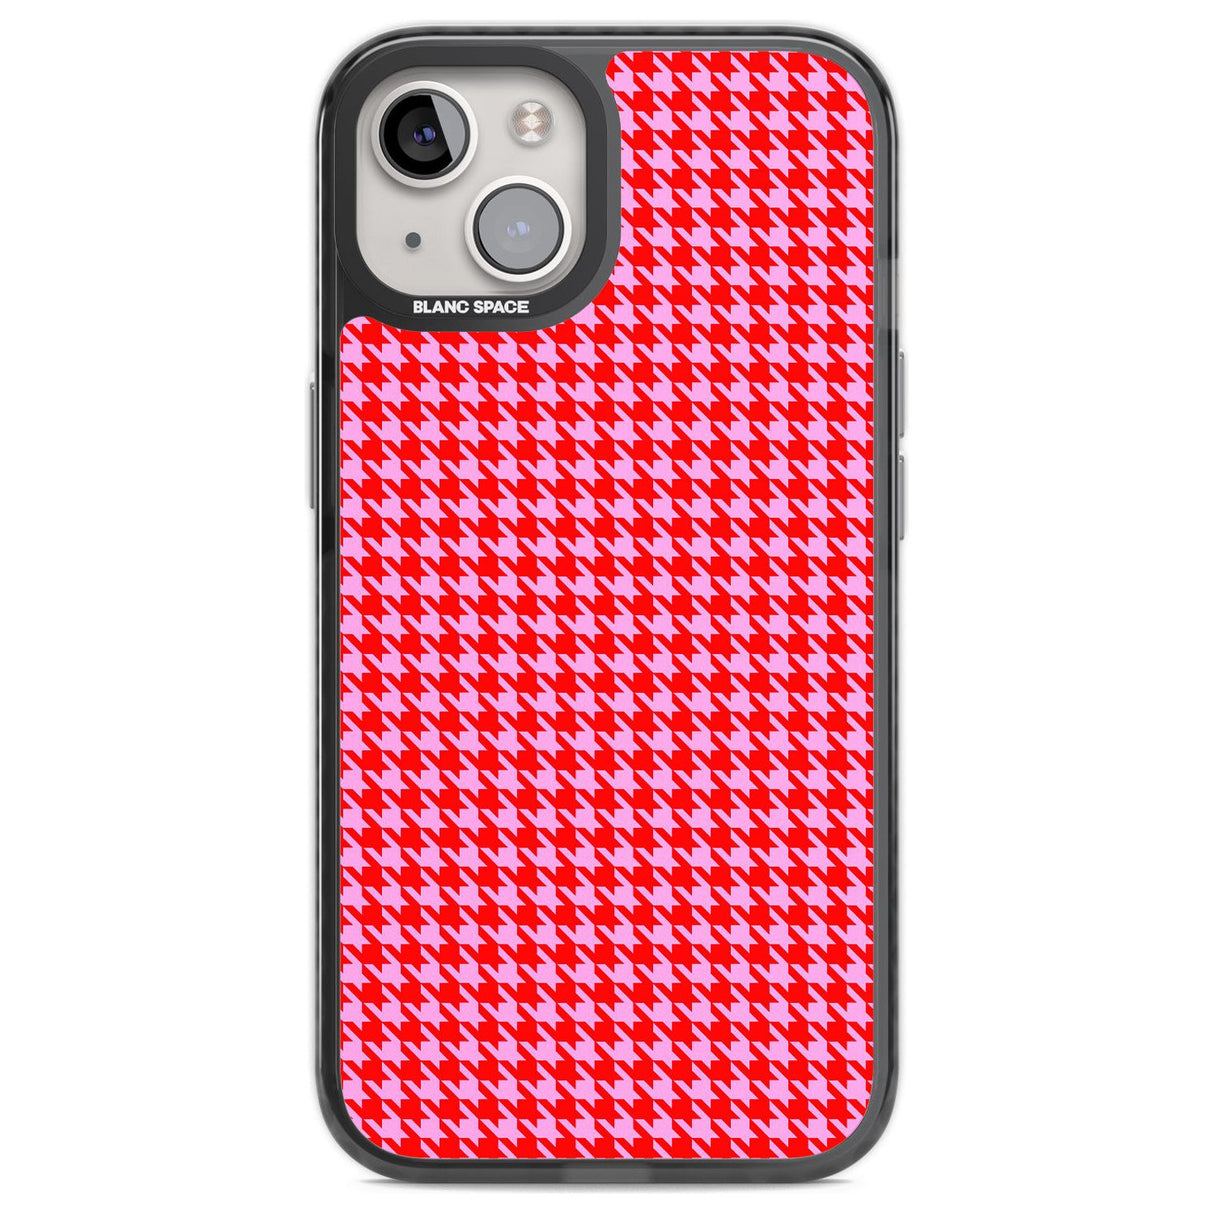 Neon Pink & Red Houndstooth Pattern Phone Case iPhone 12 / Black Impact Case,iPhone 13 / Black Impact Case,iPhone 12 Pro / Black Impact Case,iPhone 14 / Black Impact Case,iPhone 15 Plus / Black Impact Case,iPhone 15 / Black Impact Case Blanc Space